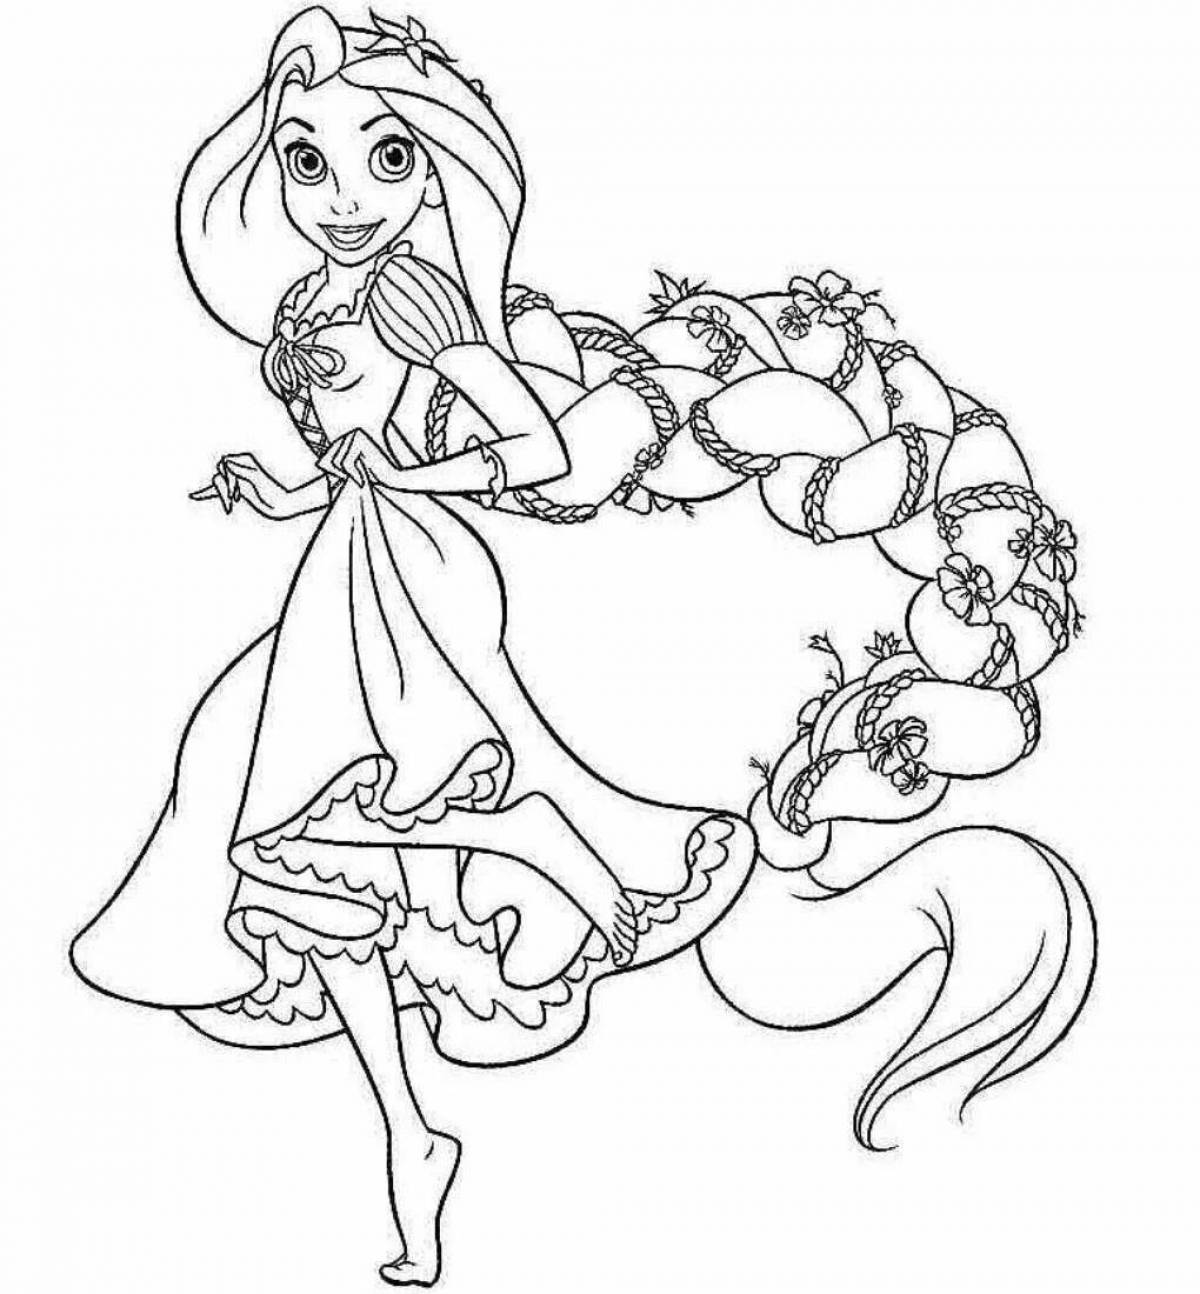 Colorful Rapunzel coloring book for children 5-6 years old